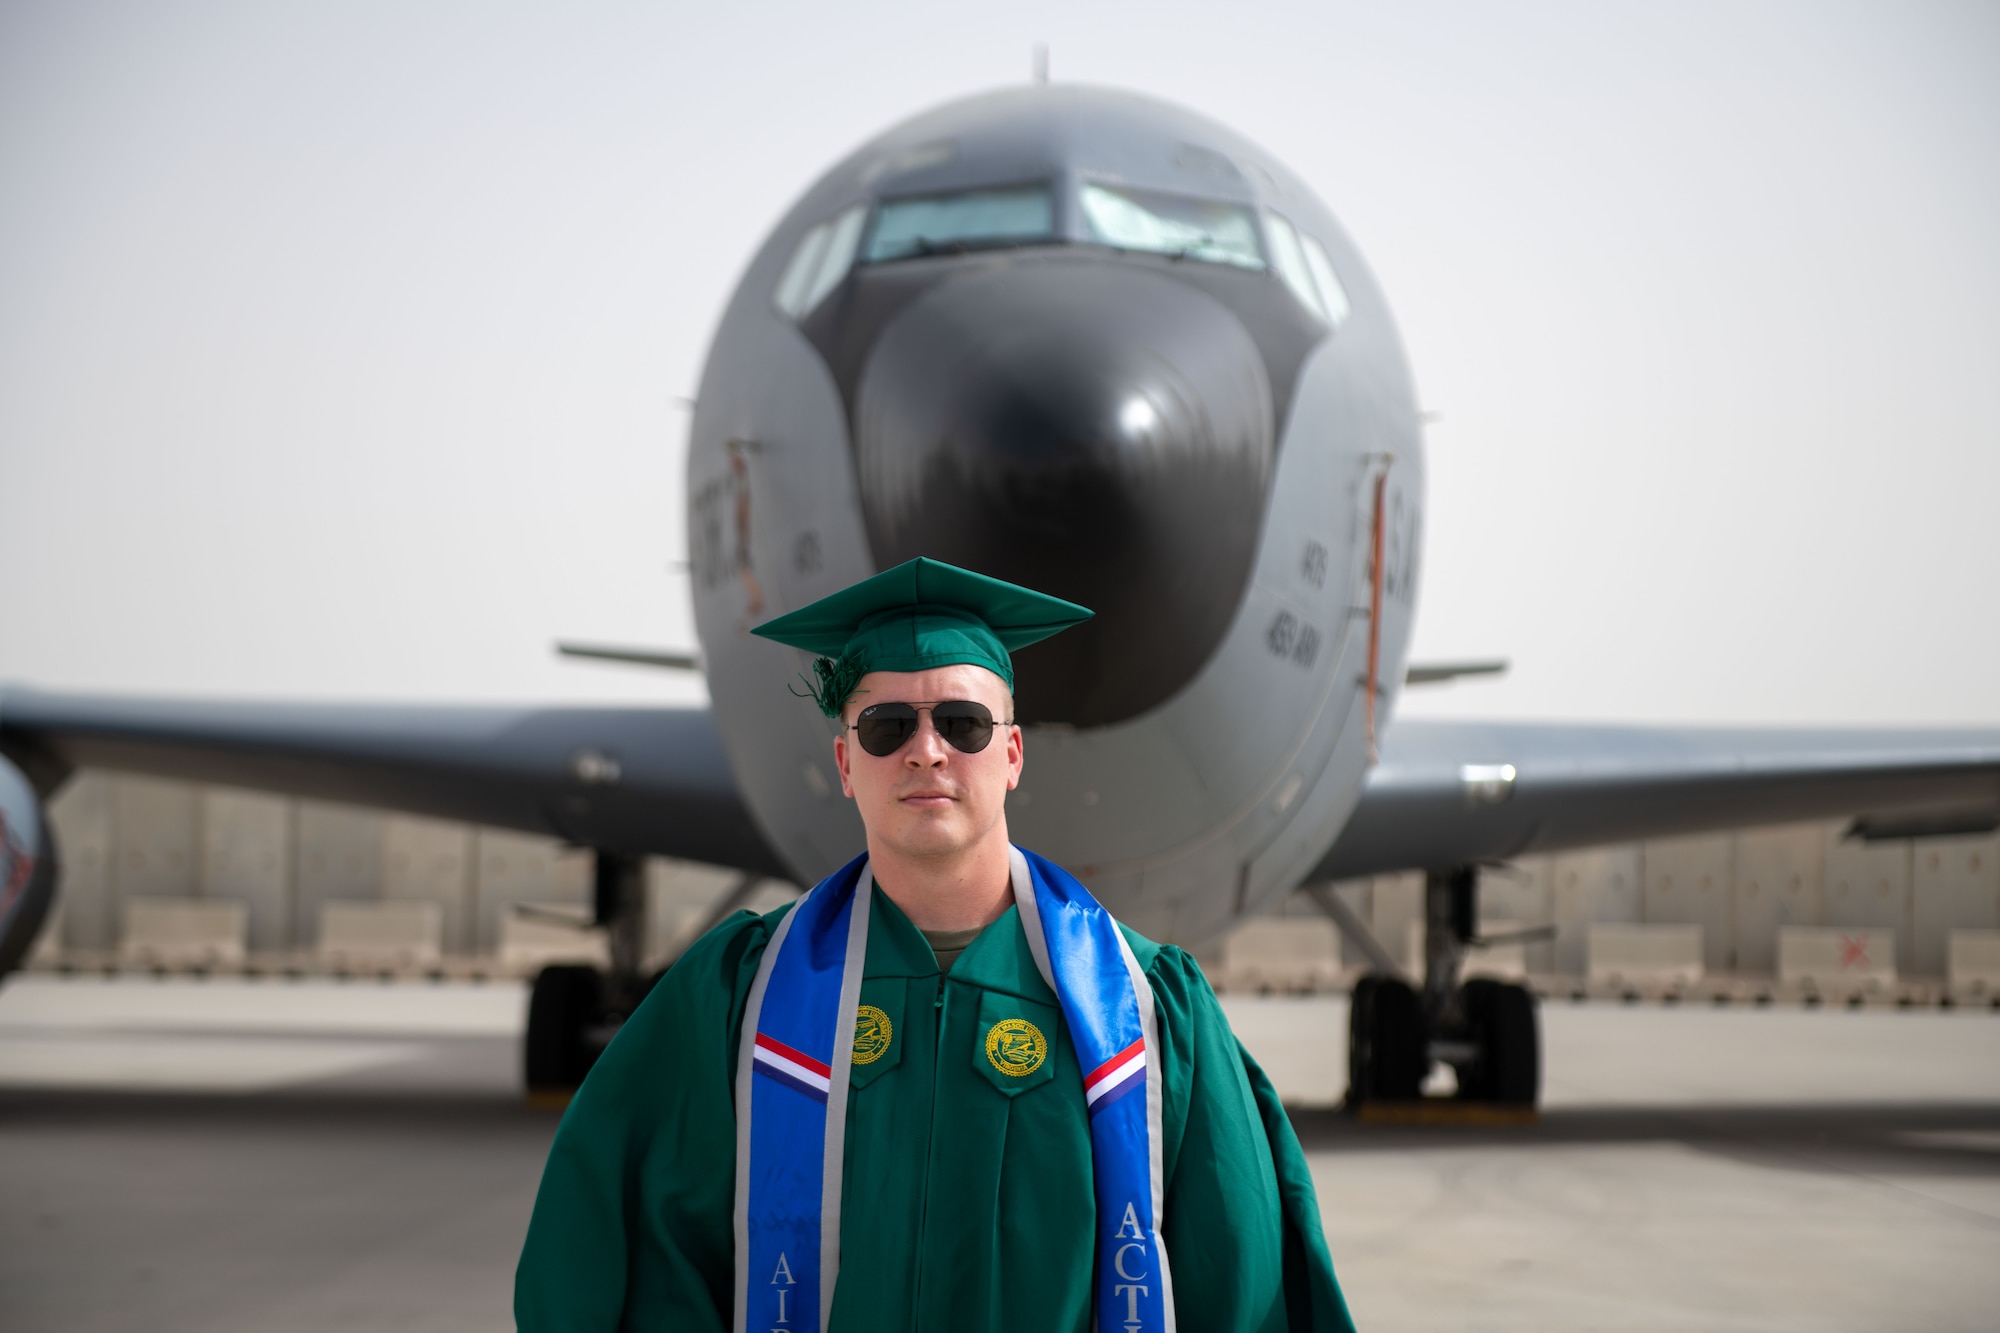 U.S. Air Force Staff Sgt. Nicholas Kremposky poses in front of a KC-135 while wearing a graduation cap and gown on Al Udeid Air Base, Qatar, May 26, 2022. Kremposky completed his bachelors degree, and is currently pursuing a masters degree with a goal of becoming a pilot. (U.S. Air National Guard photo by Airman 1st Class Constantine Bambakidis)